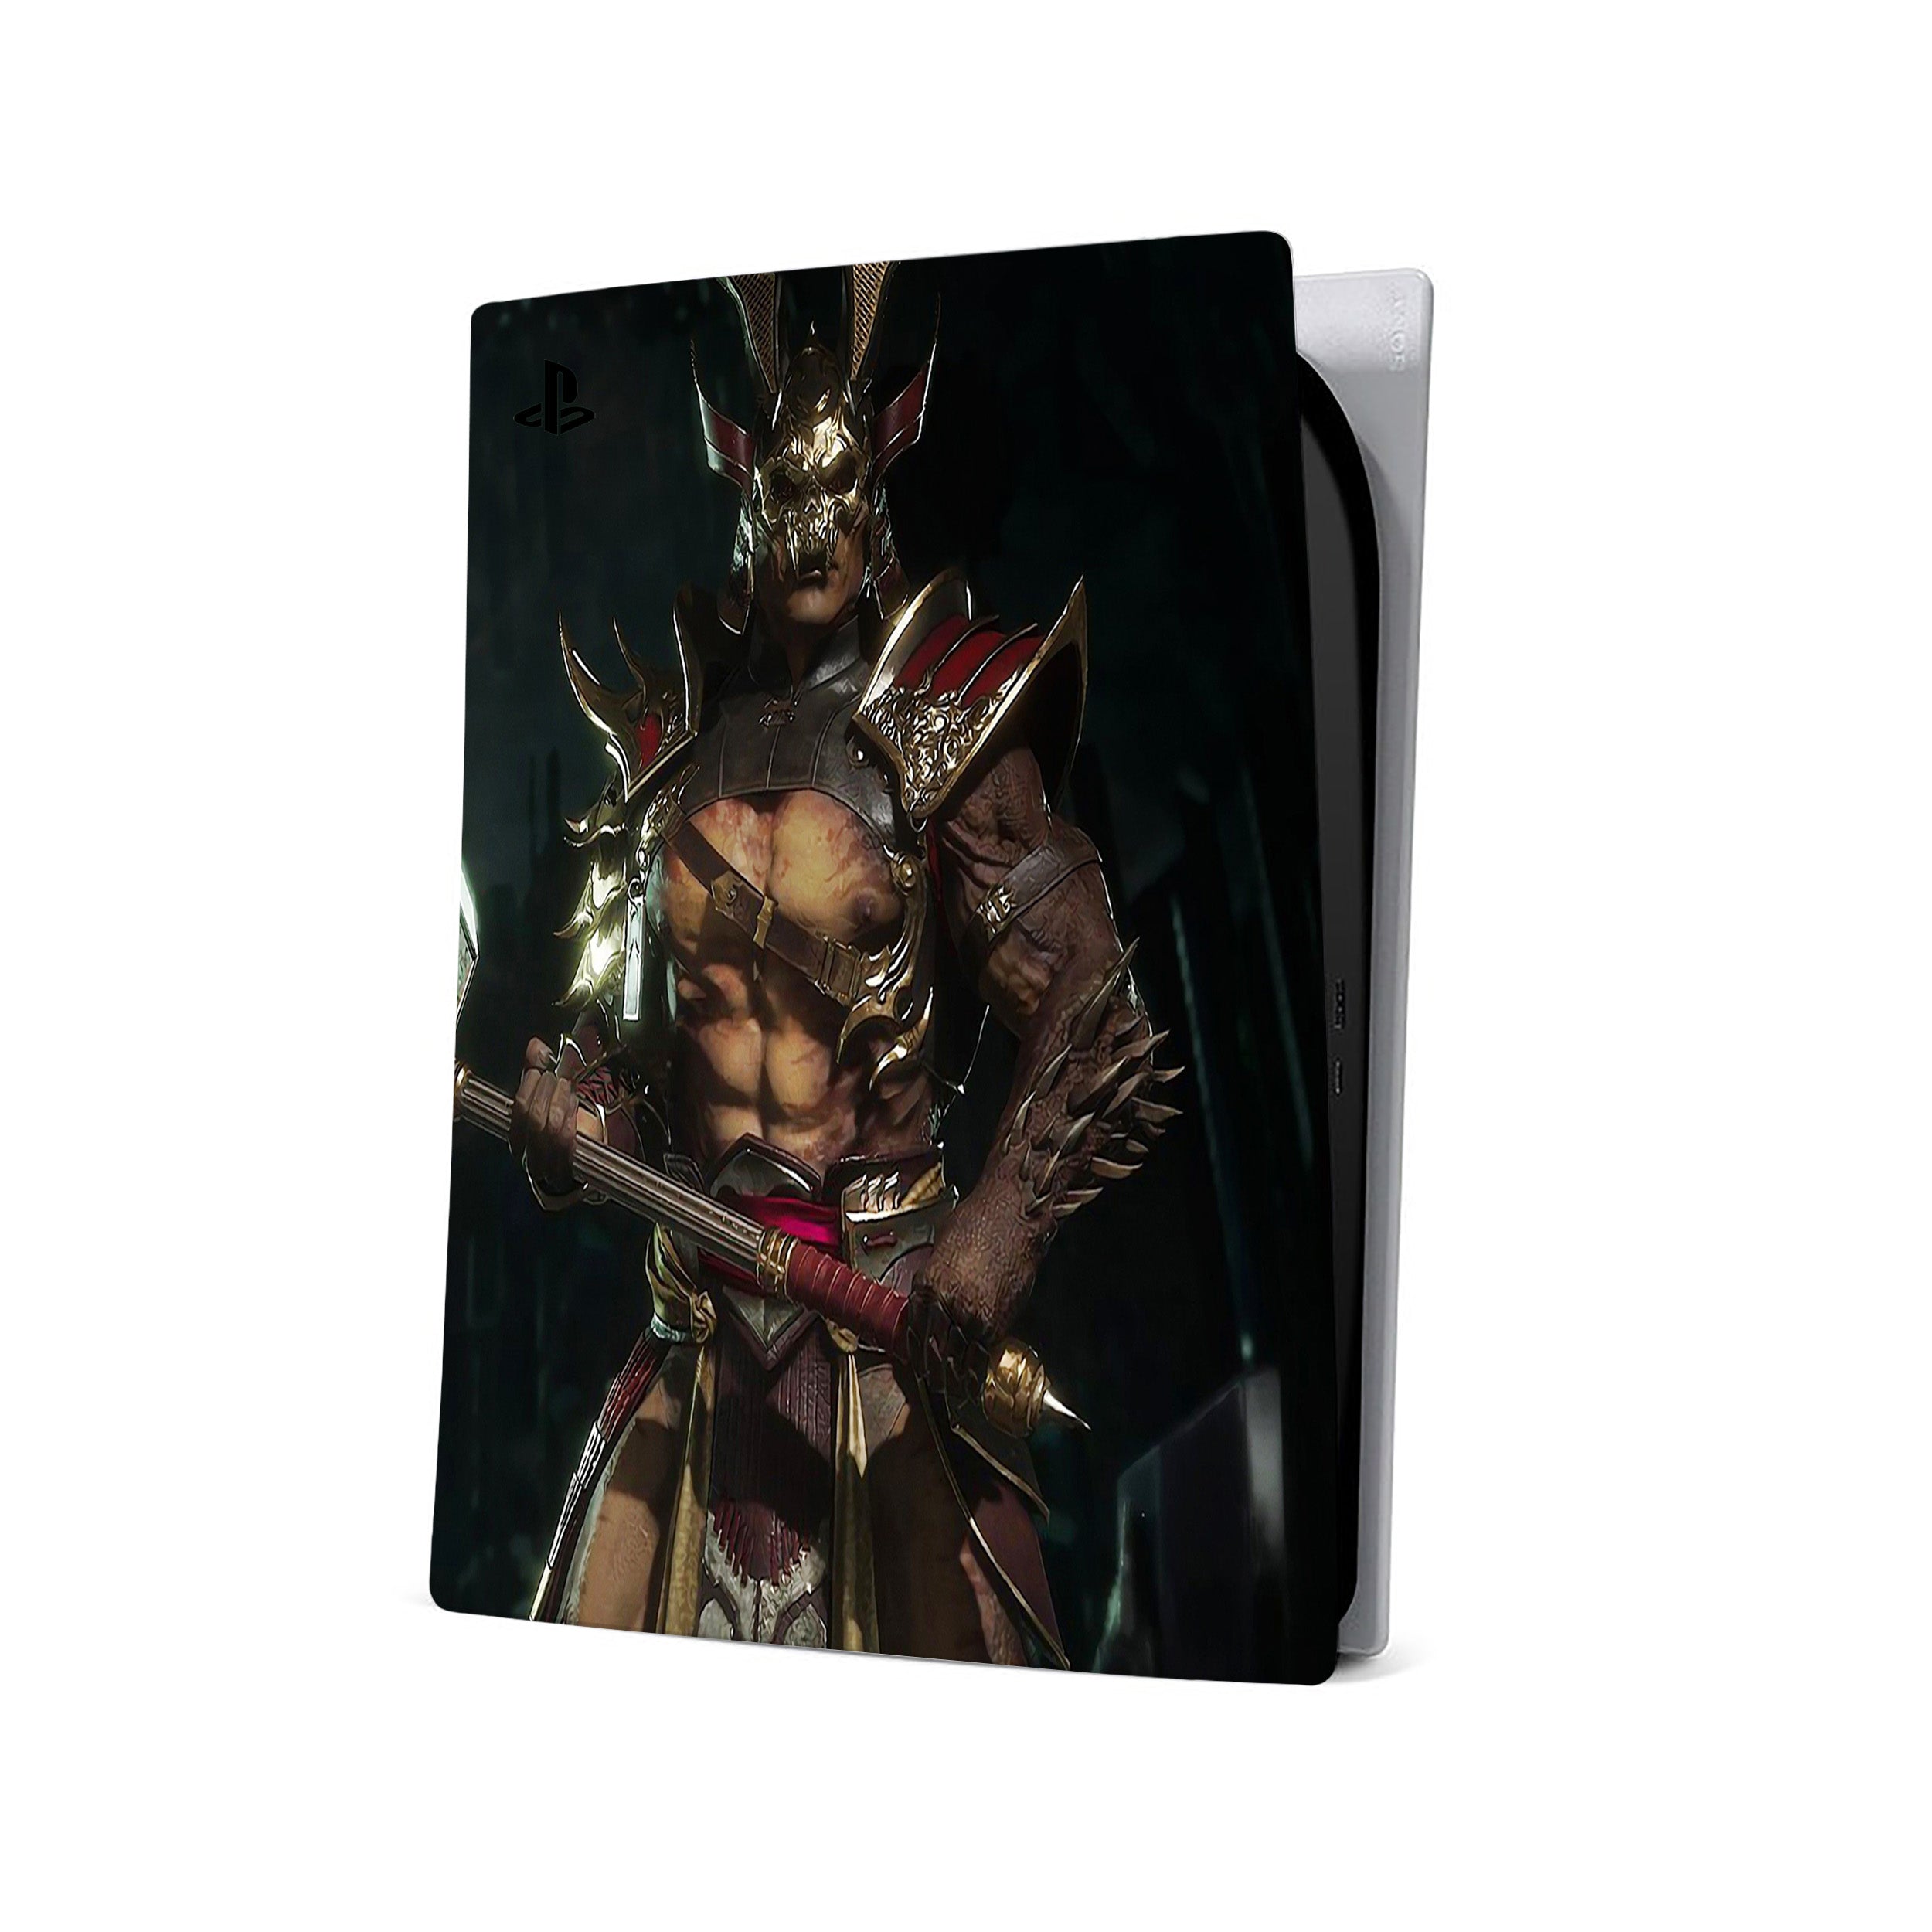 A video game skin featuring a Mortal Kombat 11 Shao Kahn design for the PS5.